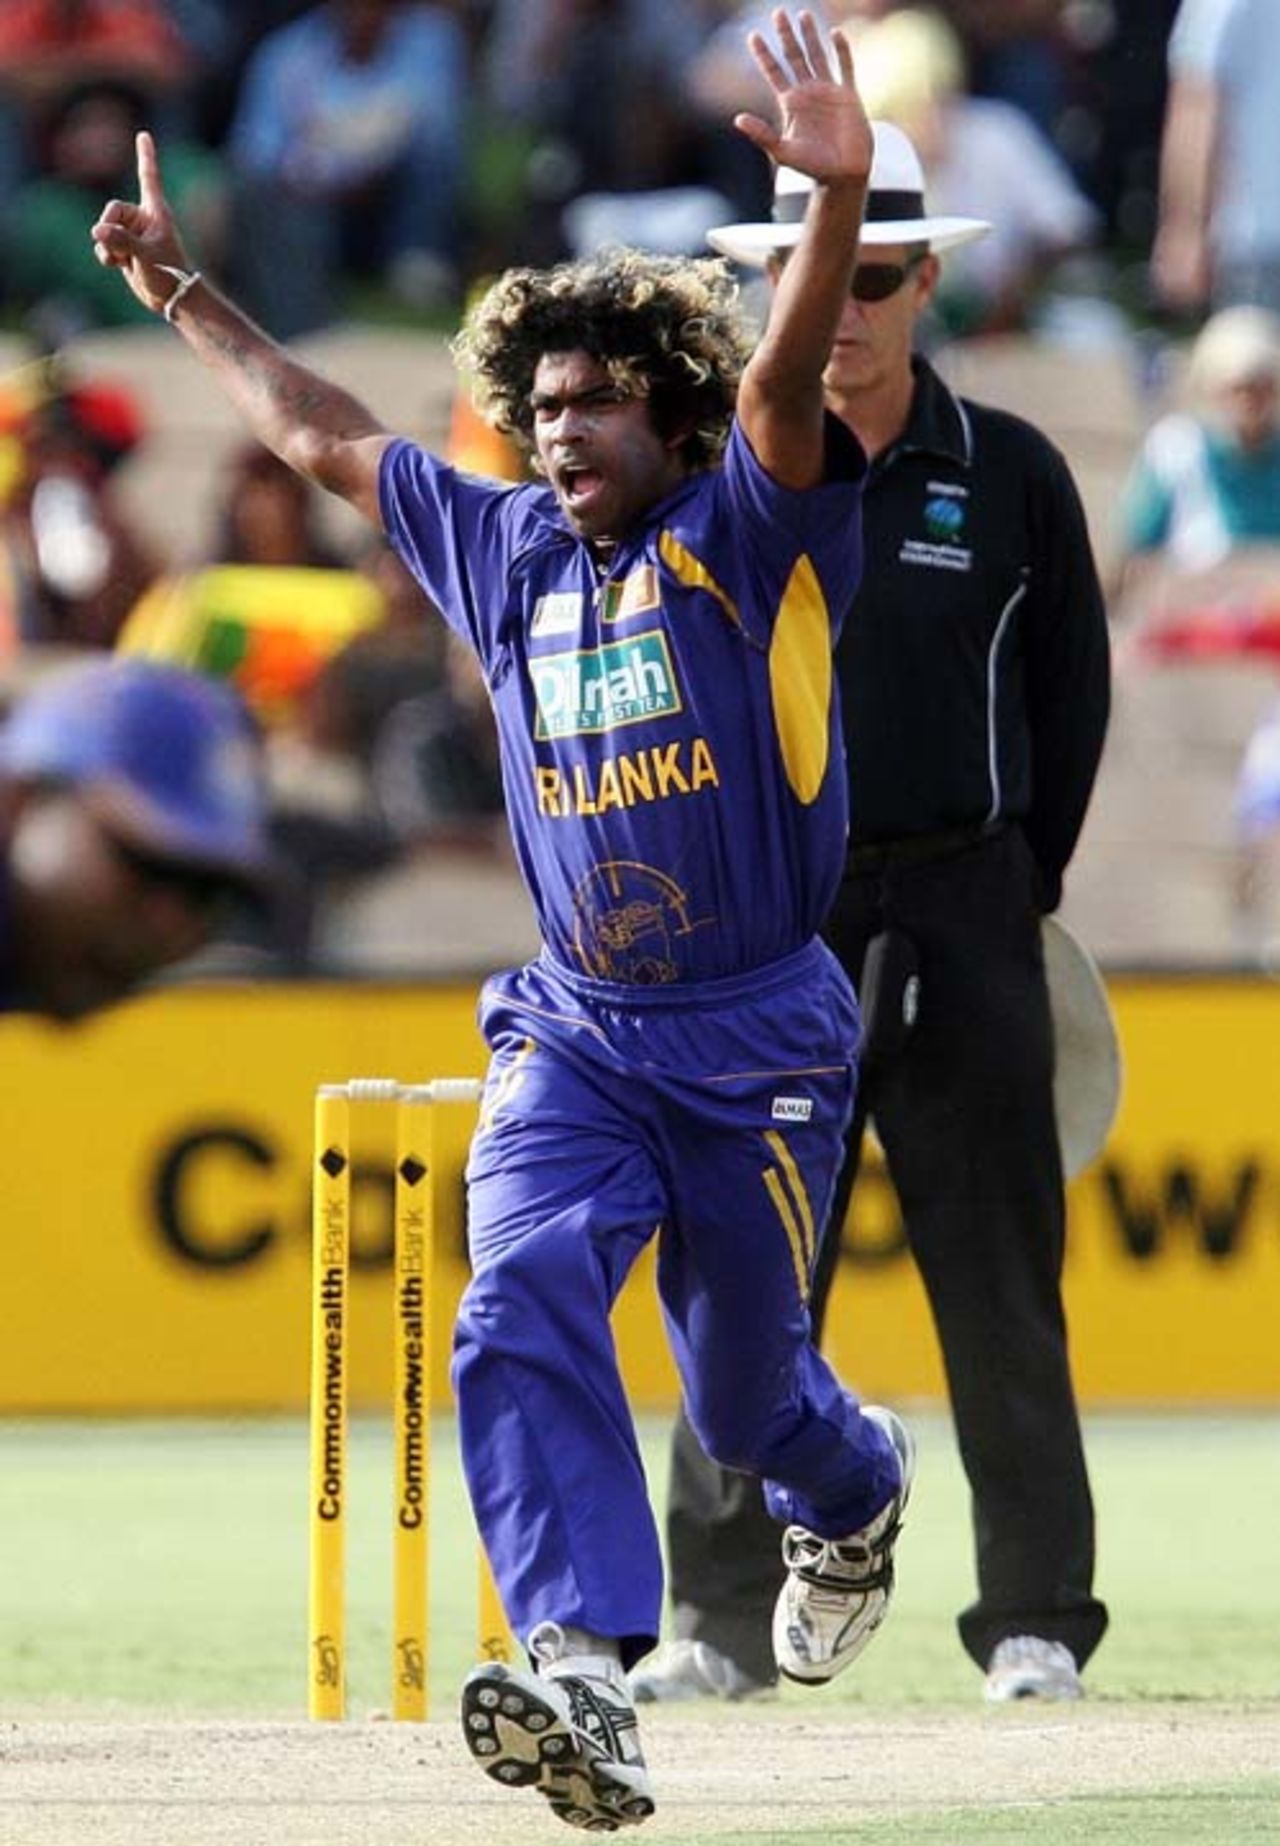 Lasith Malinga is charged up after dismissing Sachin Tendulkar with his first ball,  Sri Lanka v India, 8th match, CB Series, Adelaide, February 19, 2008 
